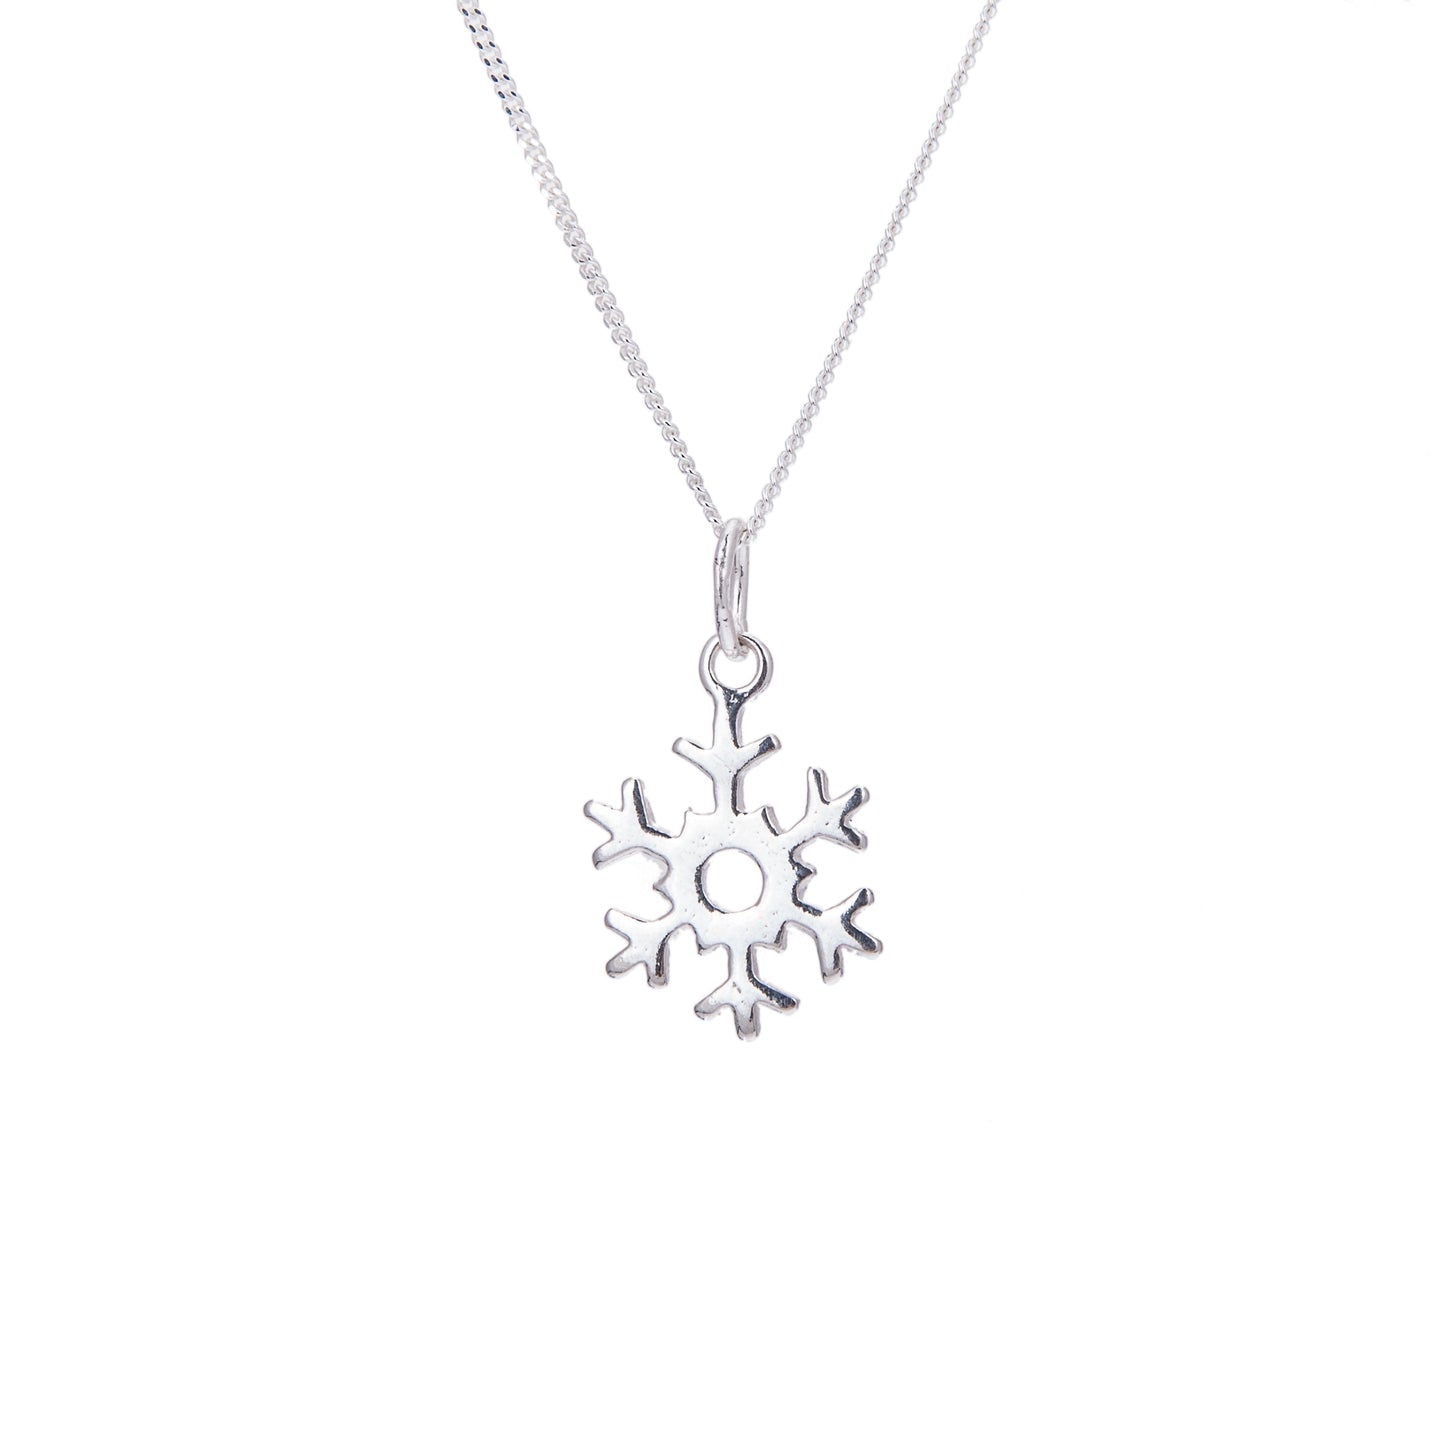 Sterling Silver Snowflake Necklace - 14 - 32 Inches